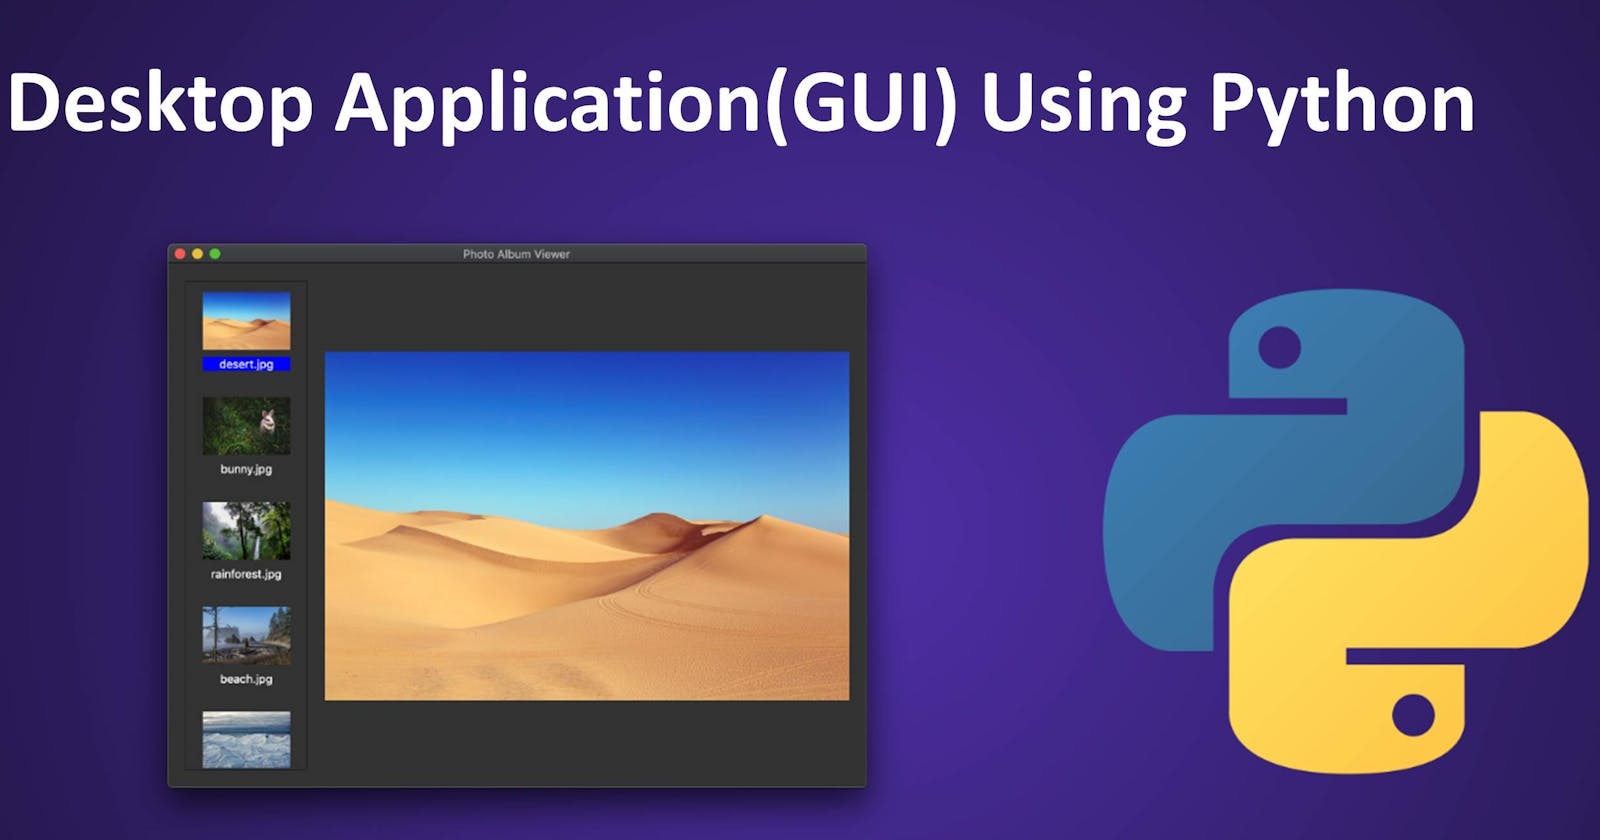 Creating a GUI Application with Python